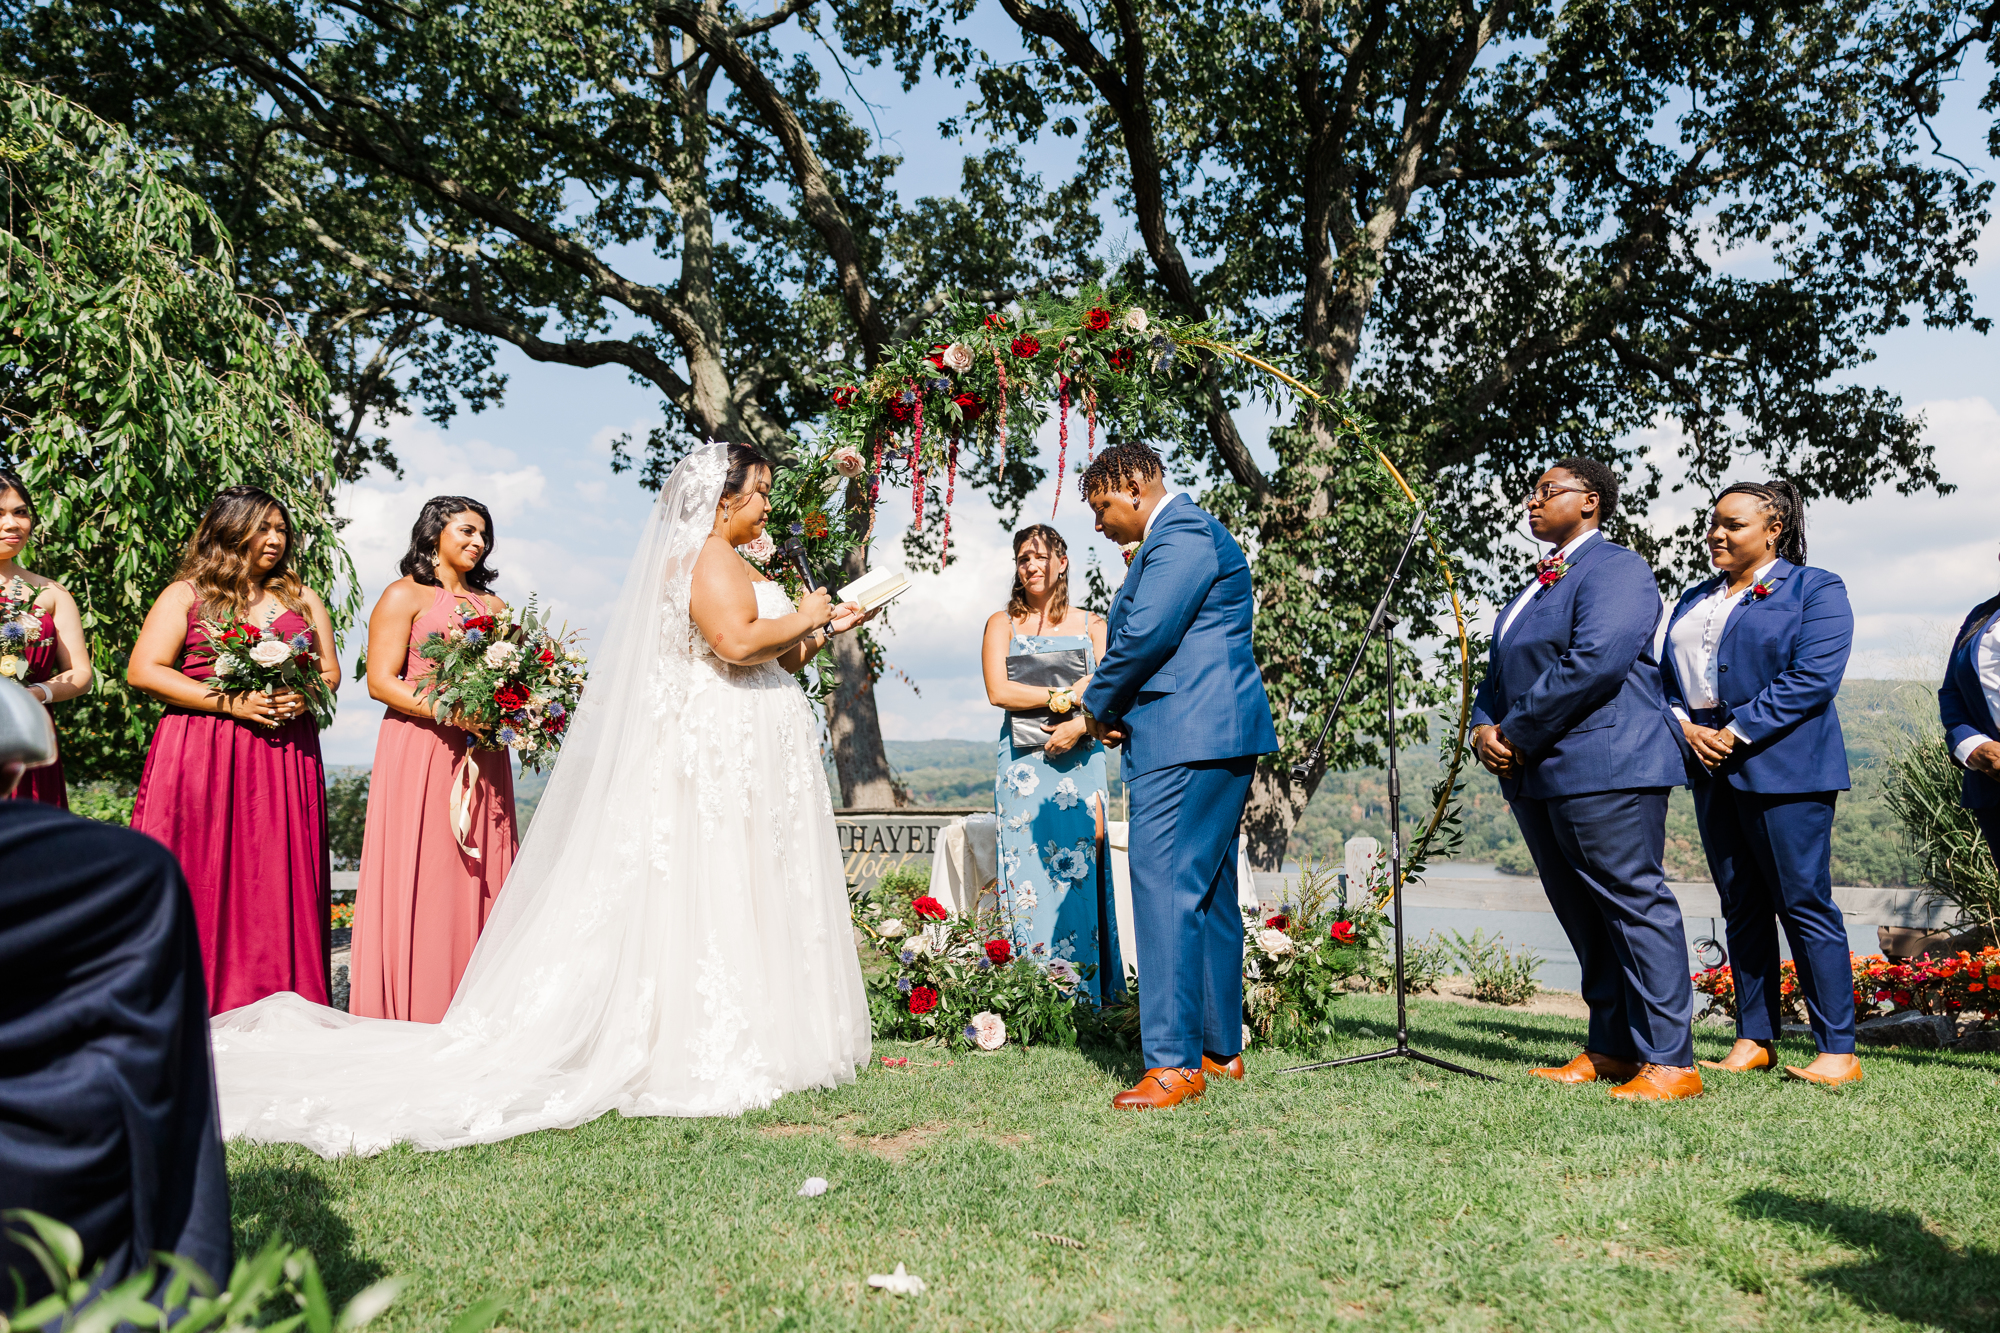 Dazzling Thayer Hotel Wedding in the Summertime